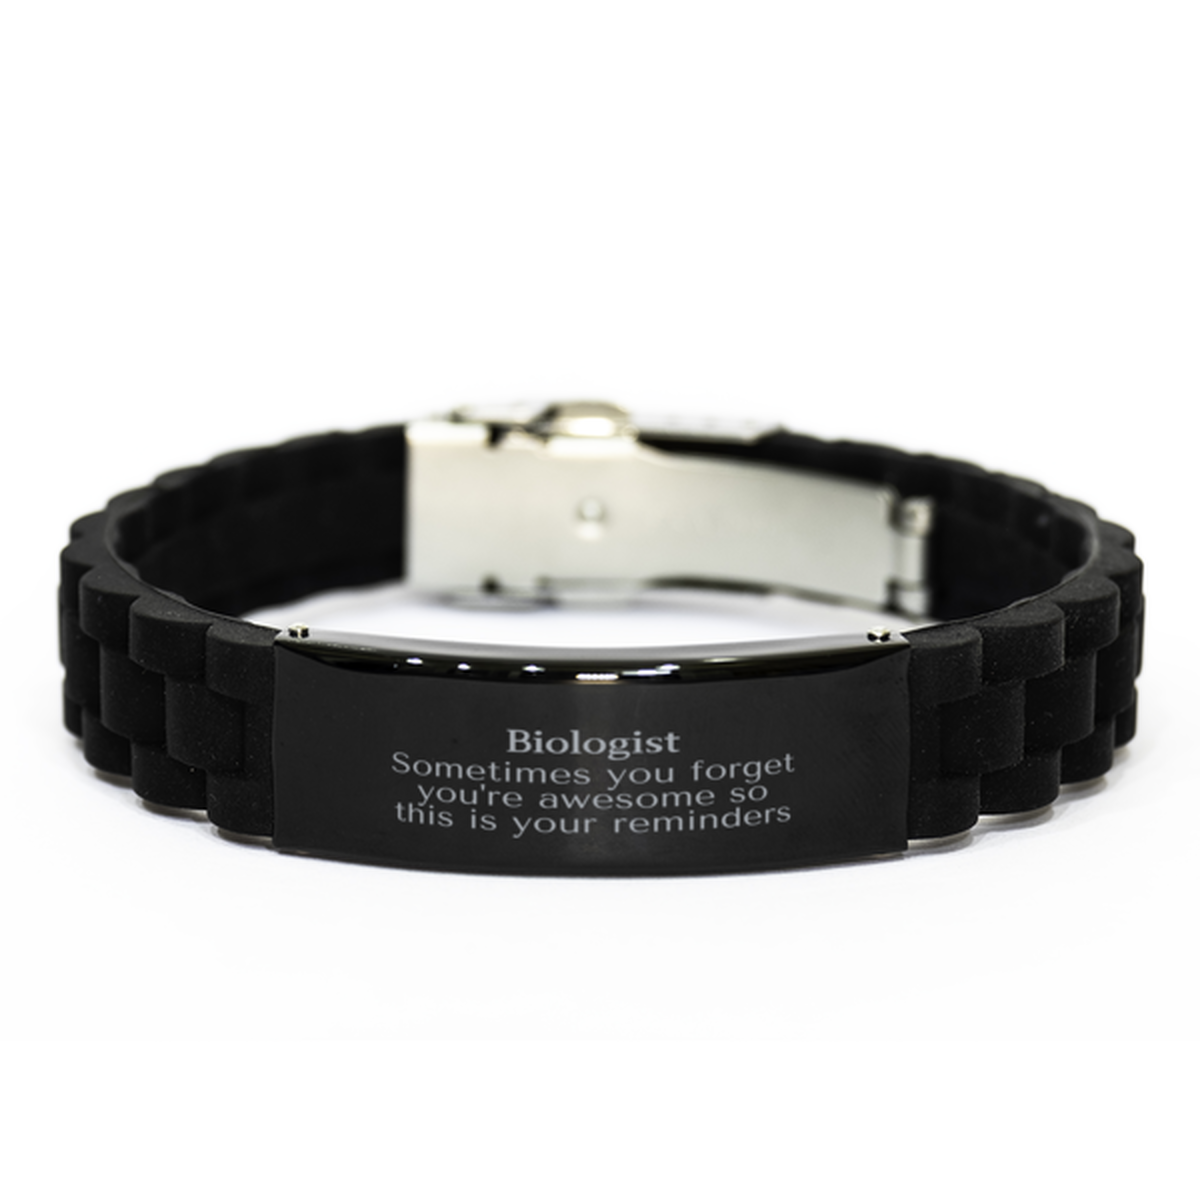 Sentimental Biologist Black Glidelock Clasp Bracelet, Biologist Sometimes you forget you're awesome so this is your reminders, Graduation Christmas Birthday Gifts for Biologist, Men, Women, Coworkers